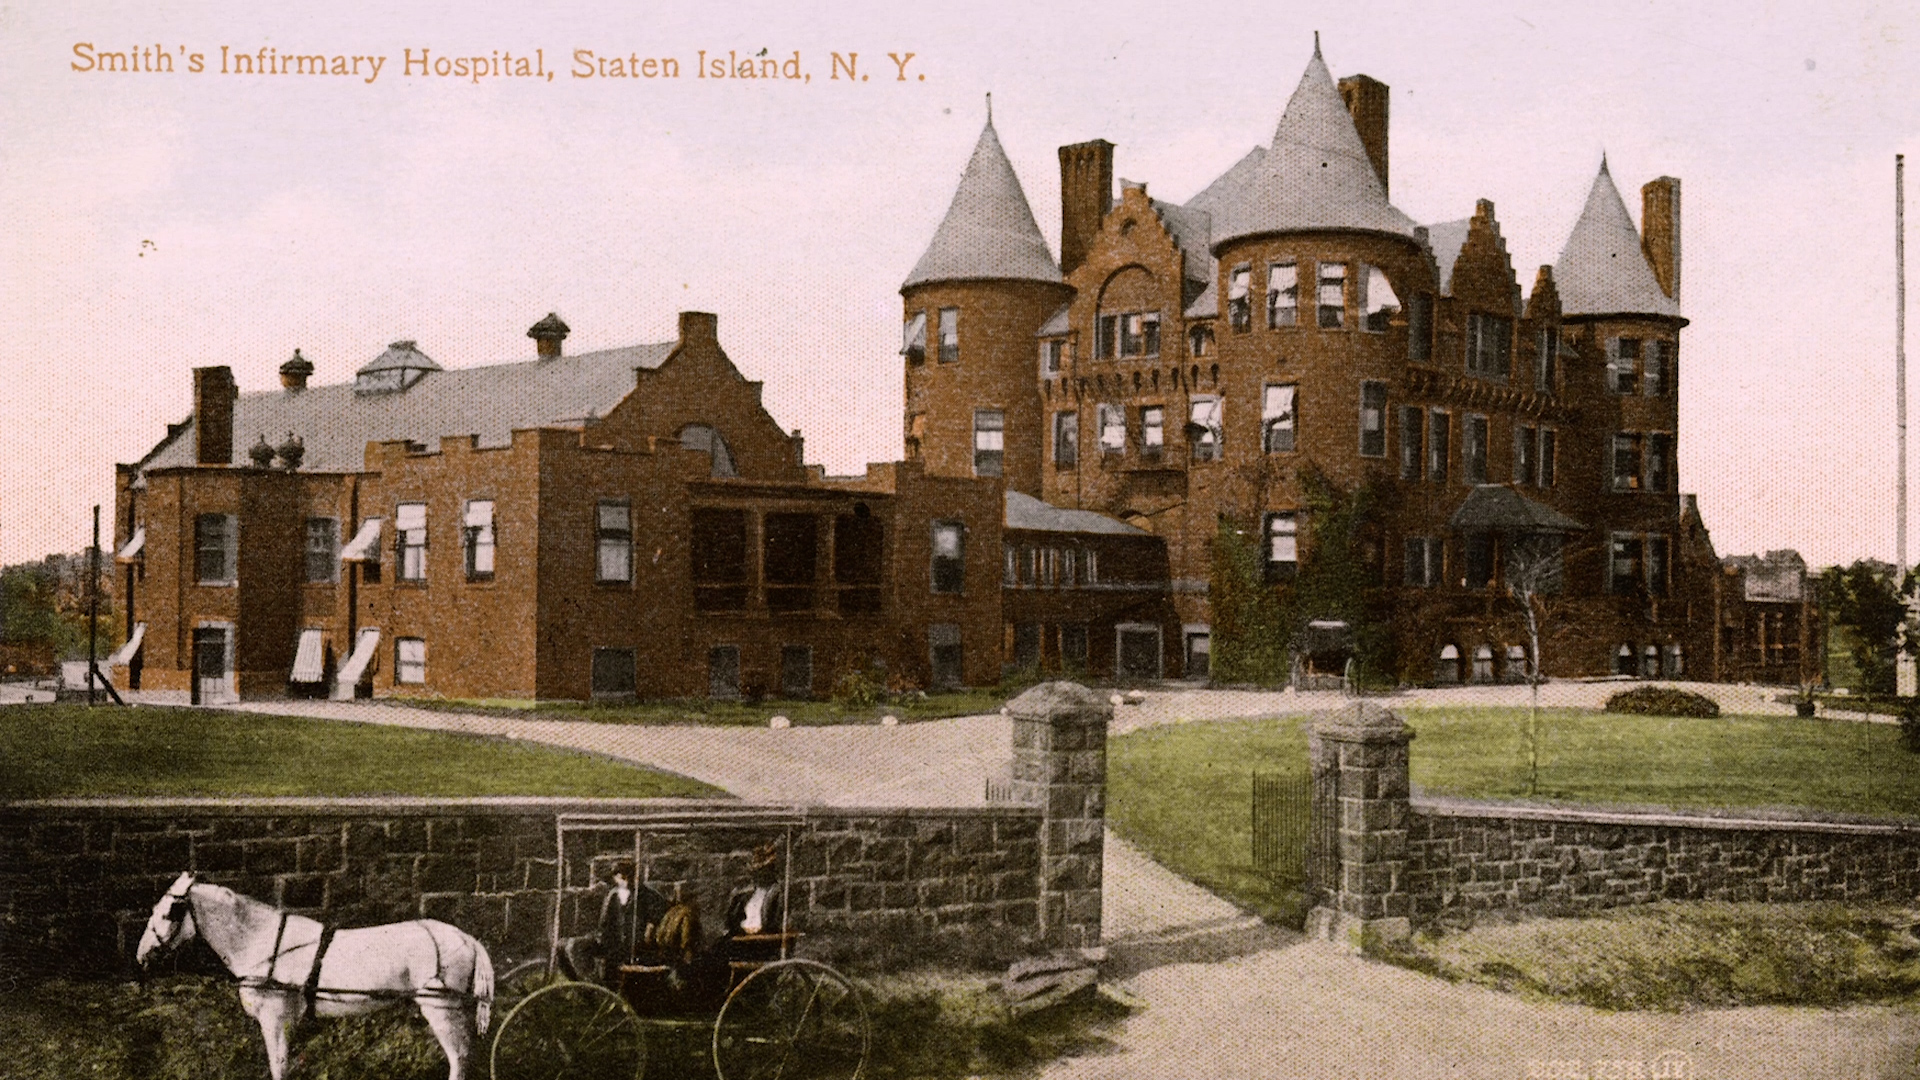 A historical look at Staten Island University Hospital